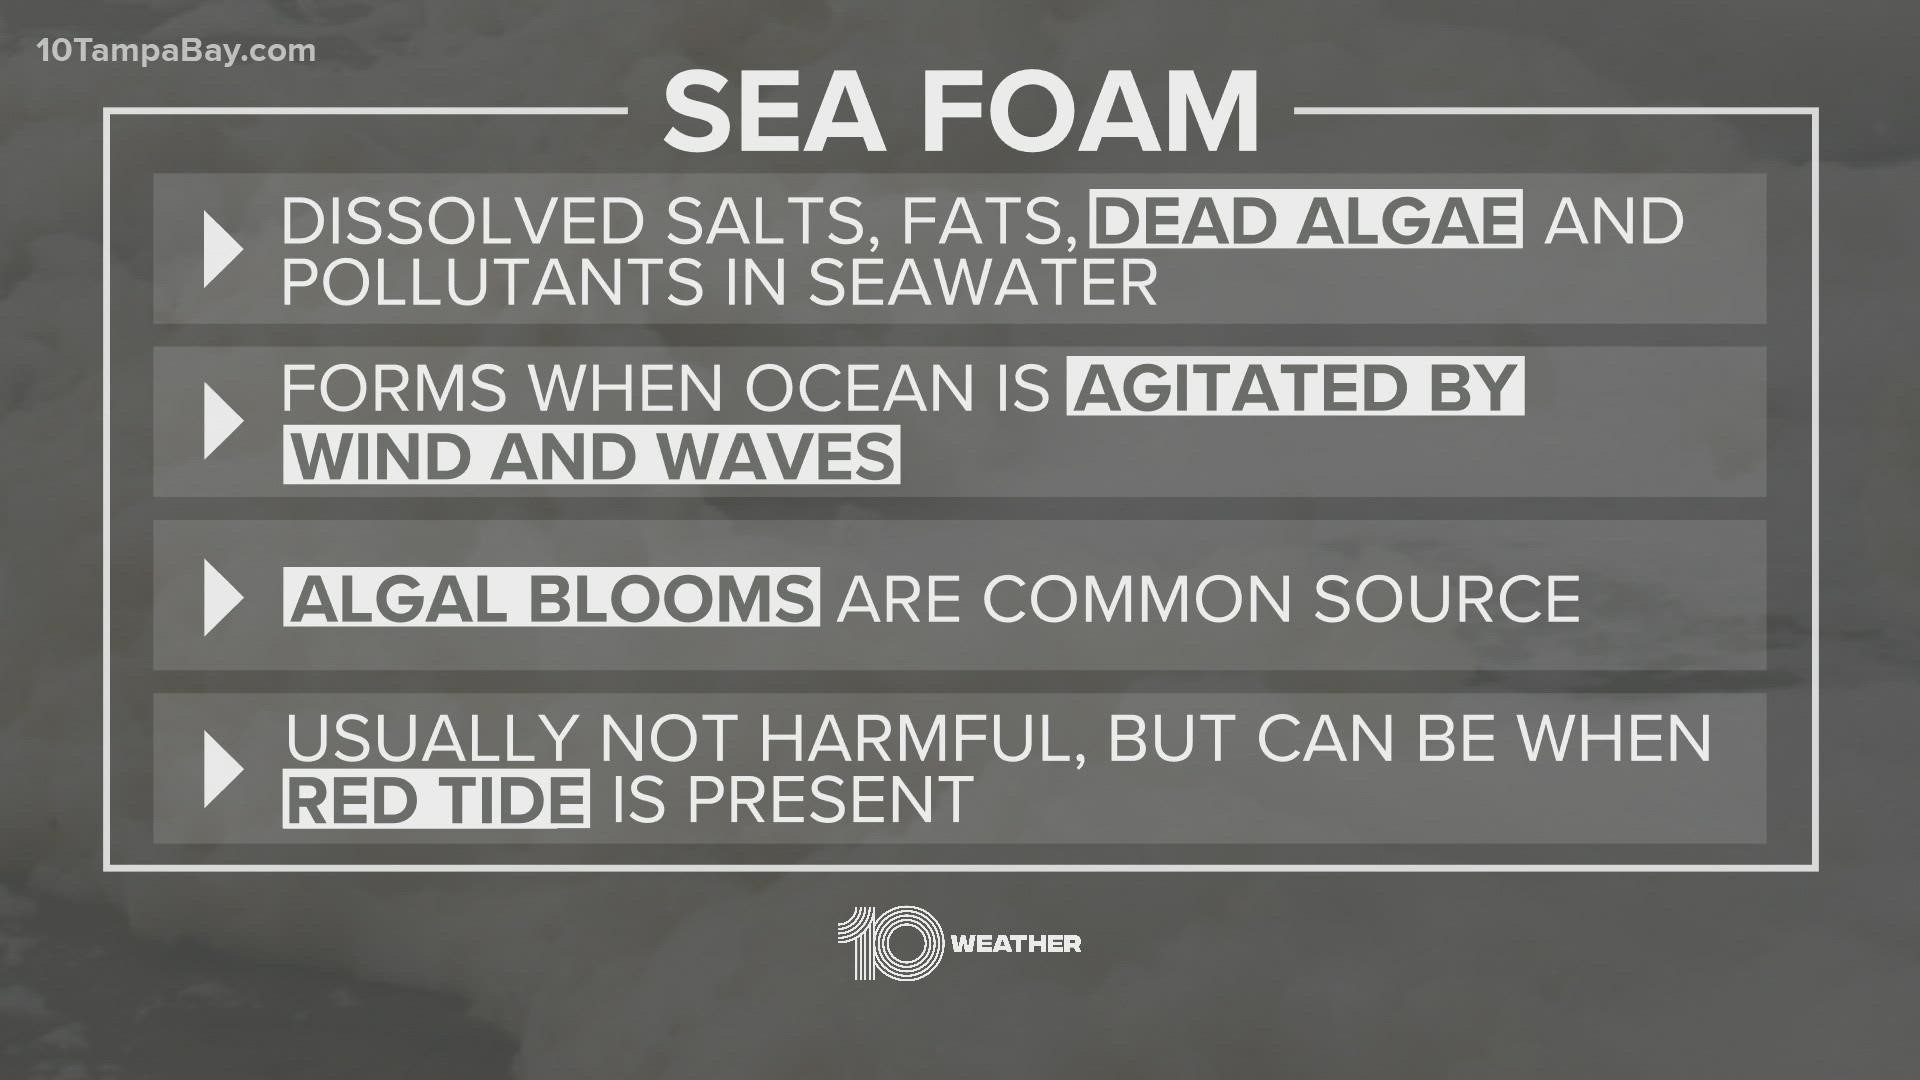 While playing with sea-foam might seem fun, it's best to leave it alone.